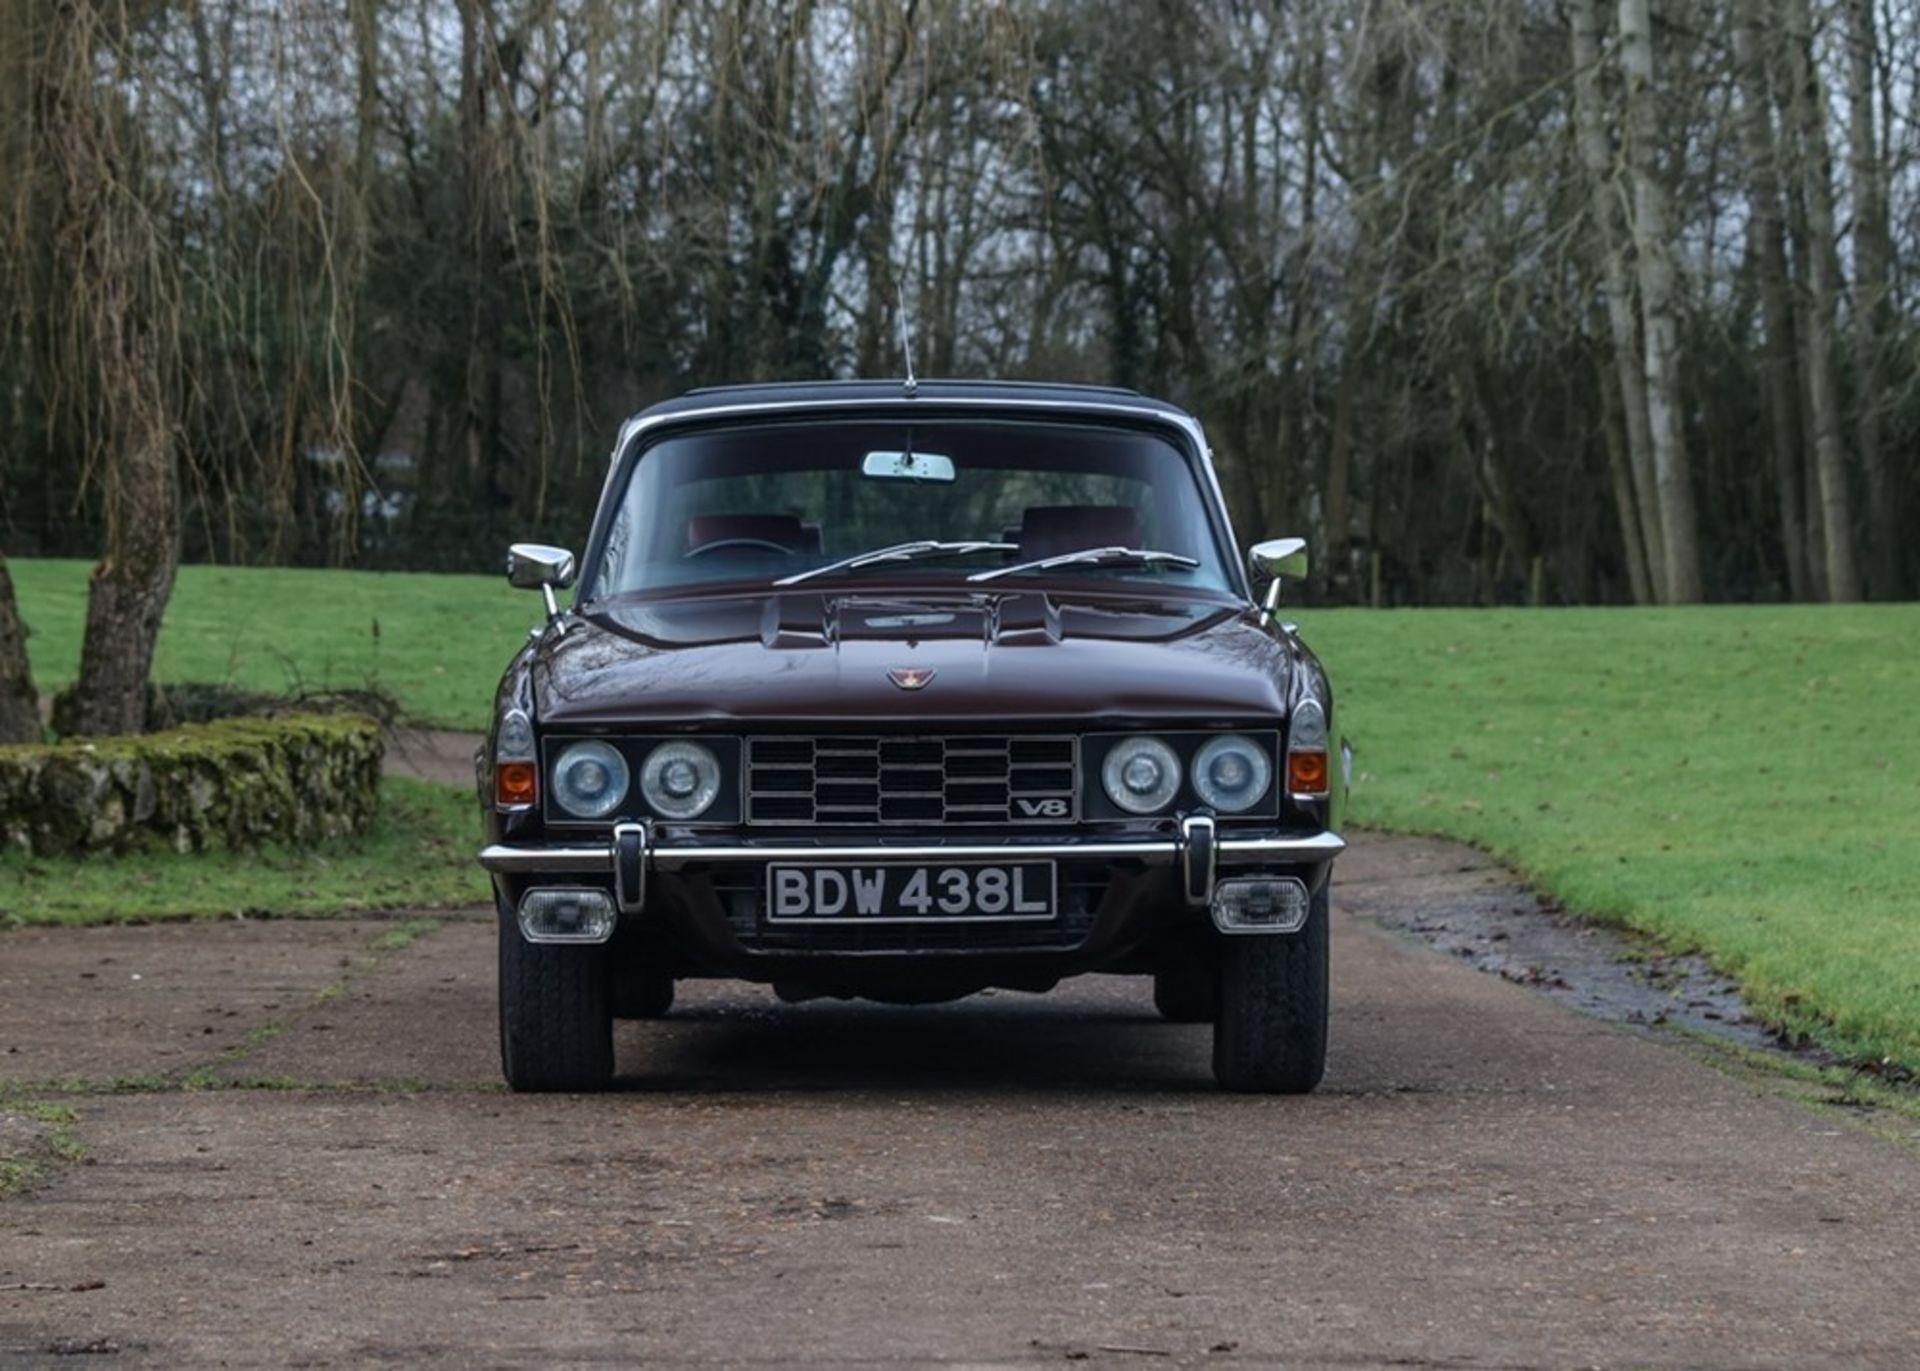 1972 Rover P6 3500 S - Image 3 of 9